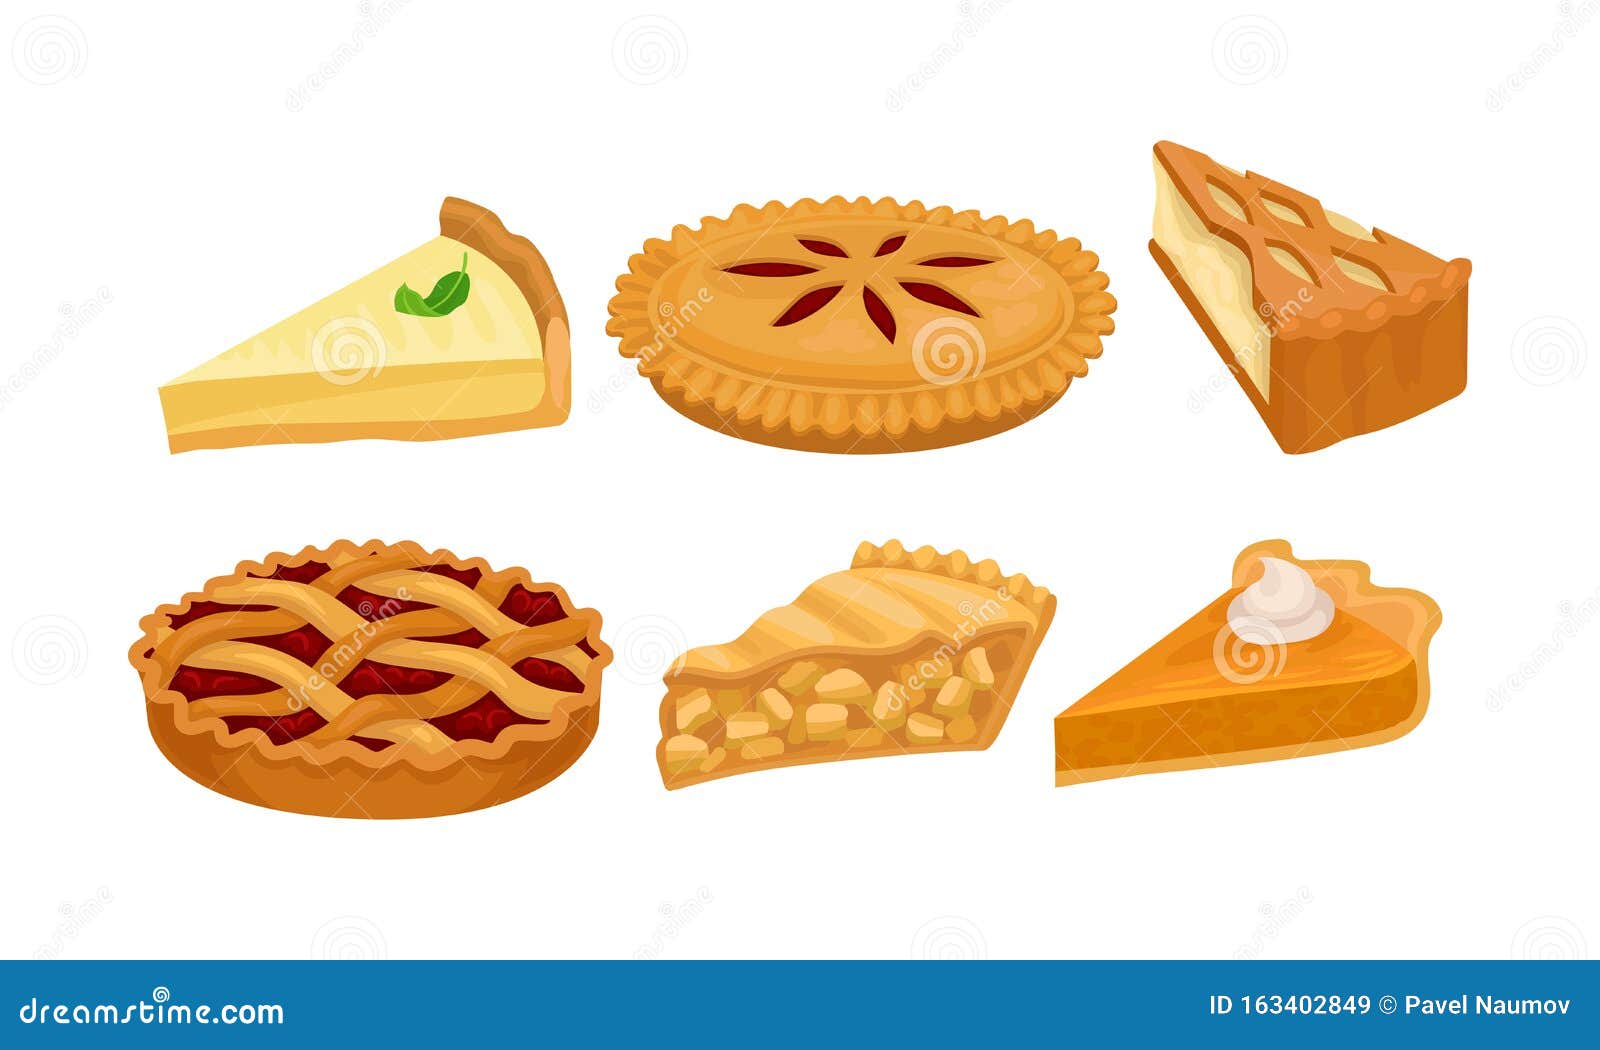 homemade cartoon pies and cakes with fruits and cream   set  on white background